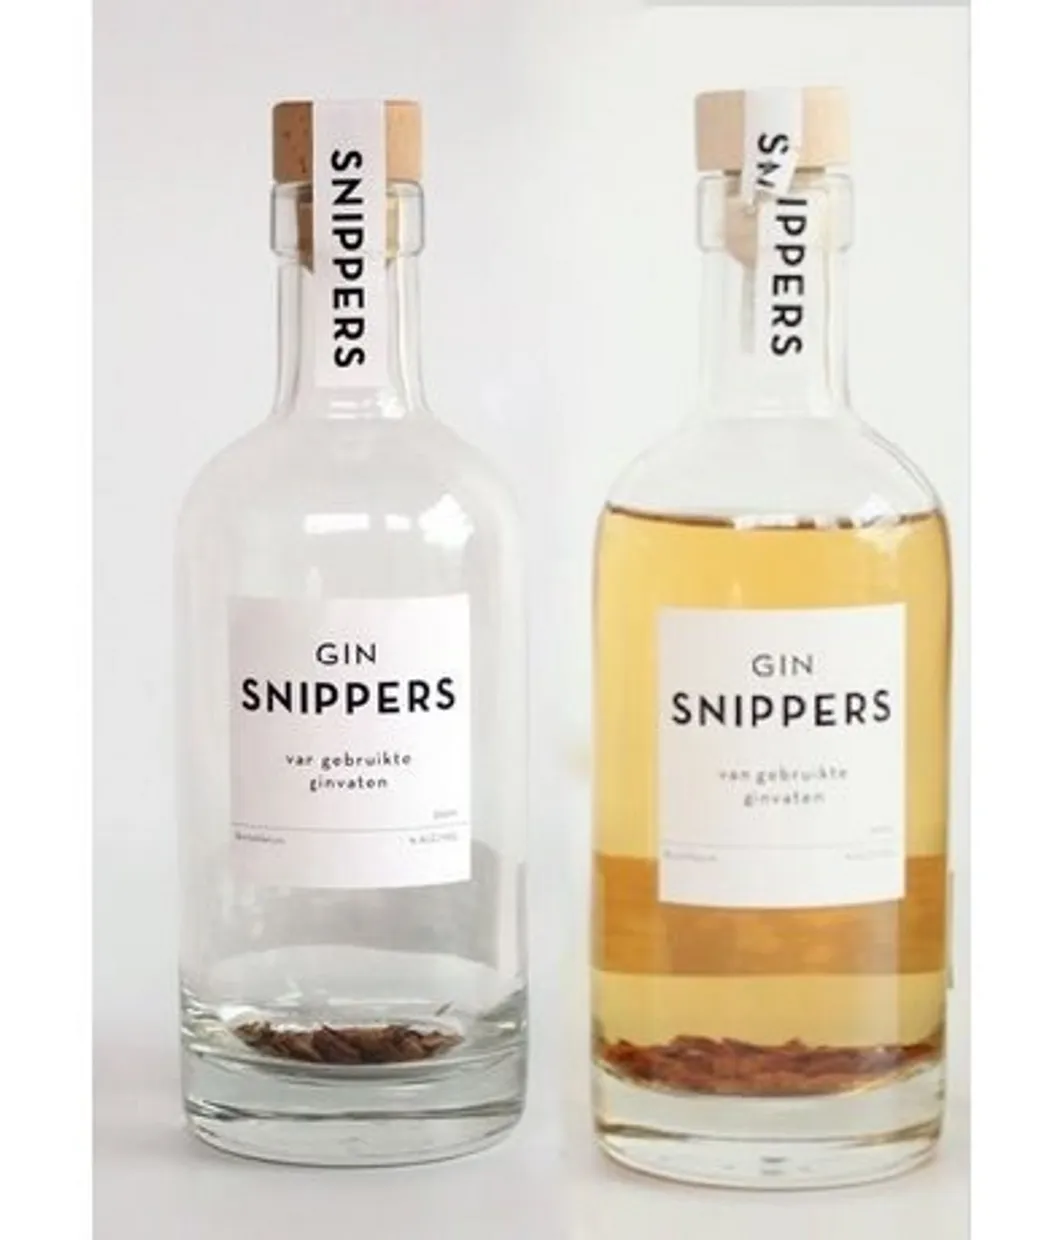 Gin snippers